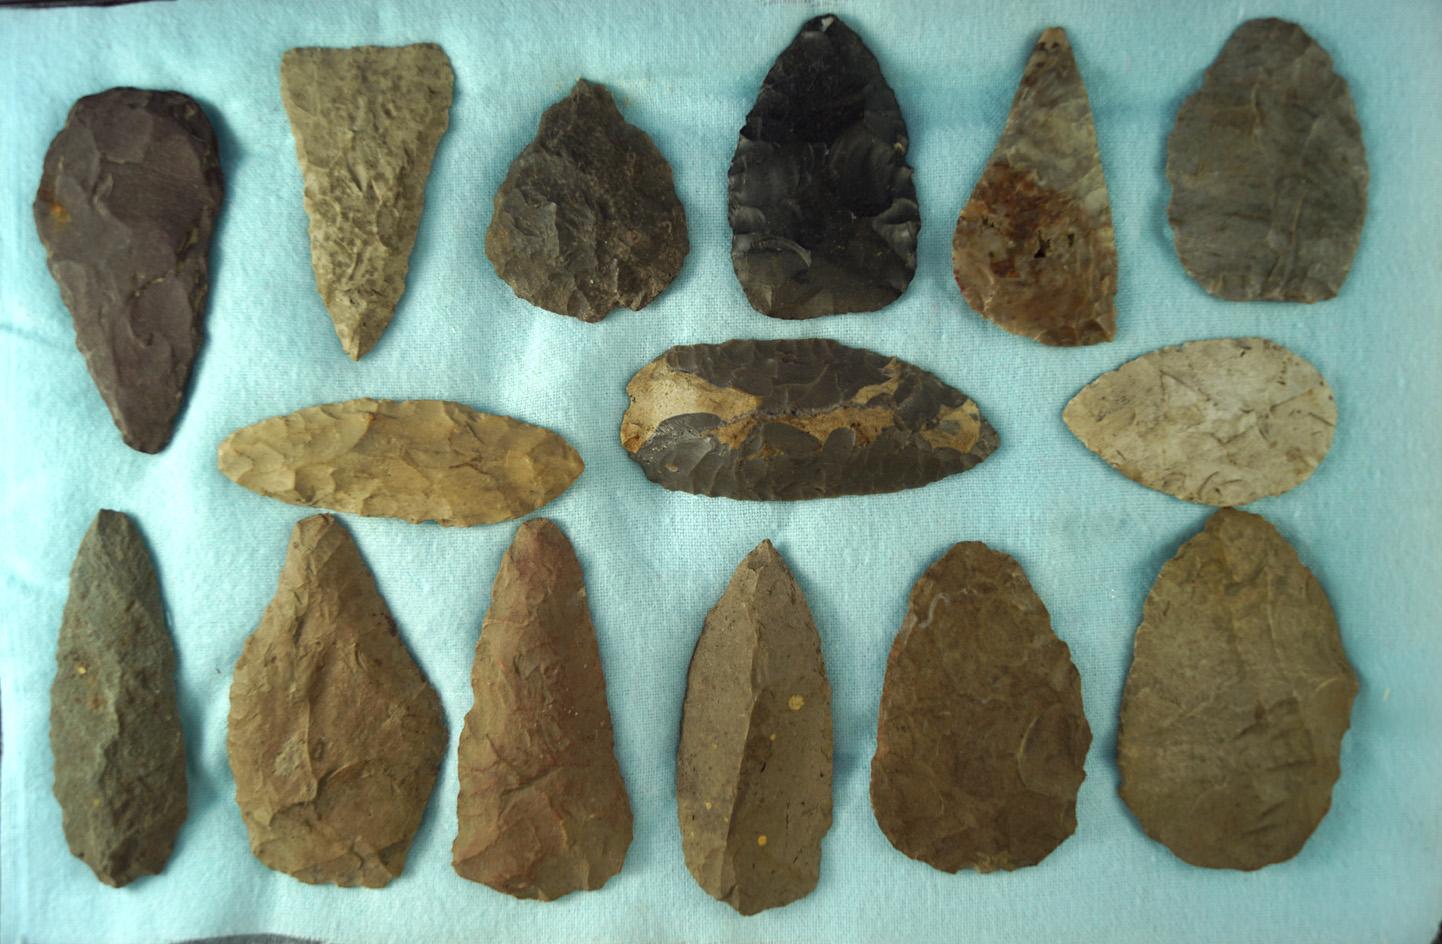 Set of 15 flint Knives And Blades found in Michigan, largest is 3". Ex. Phil Waigel collection.